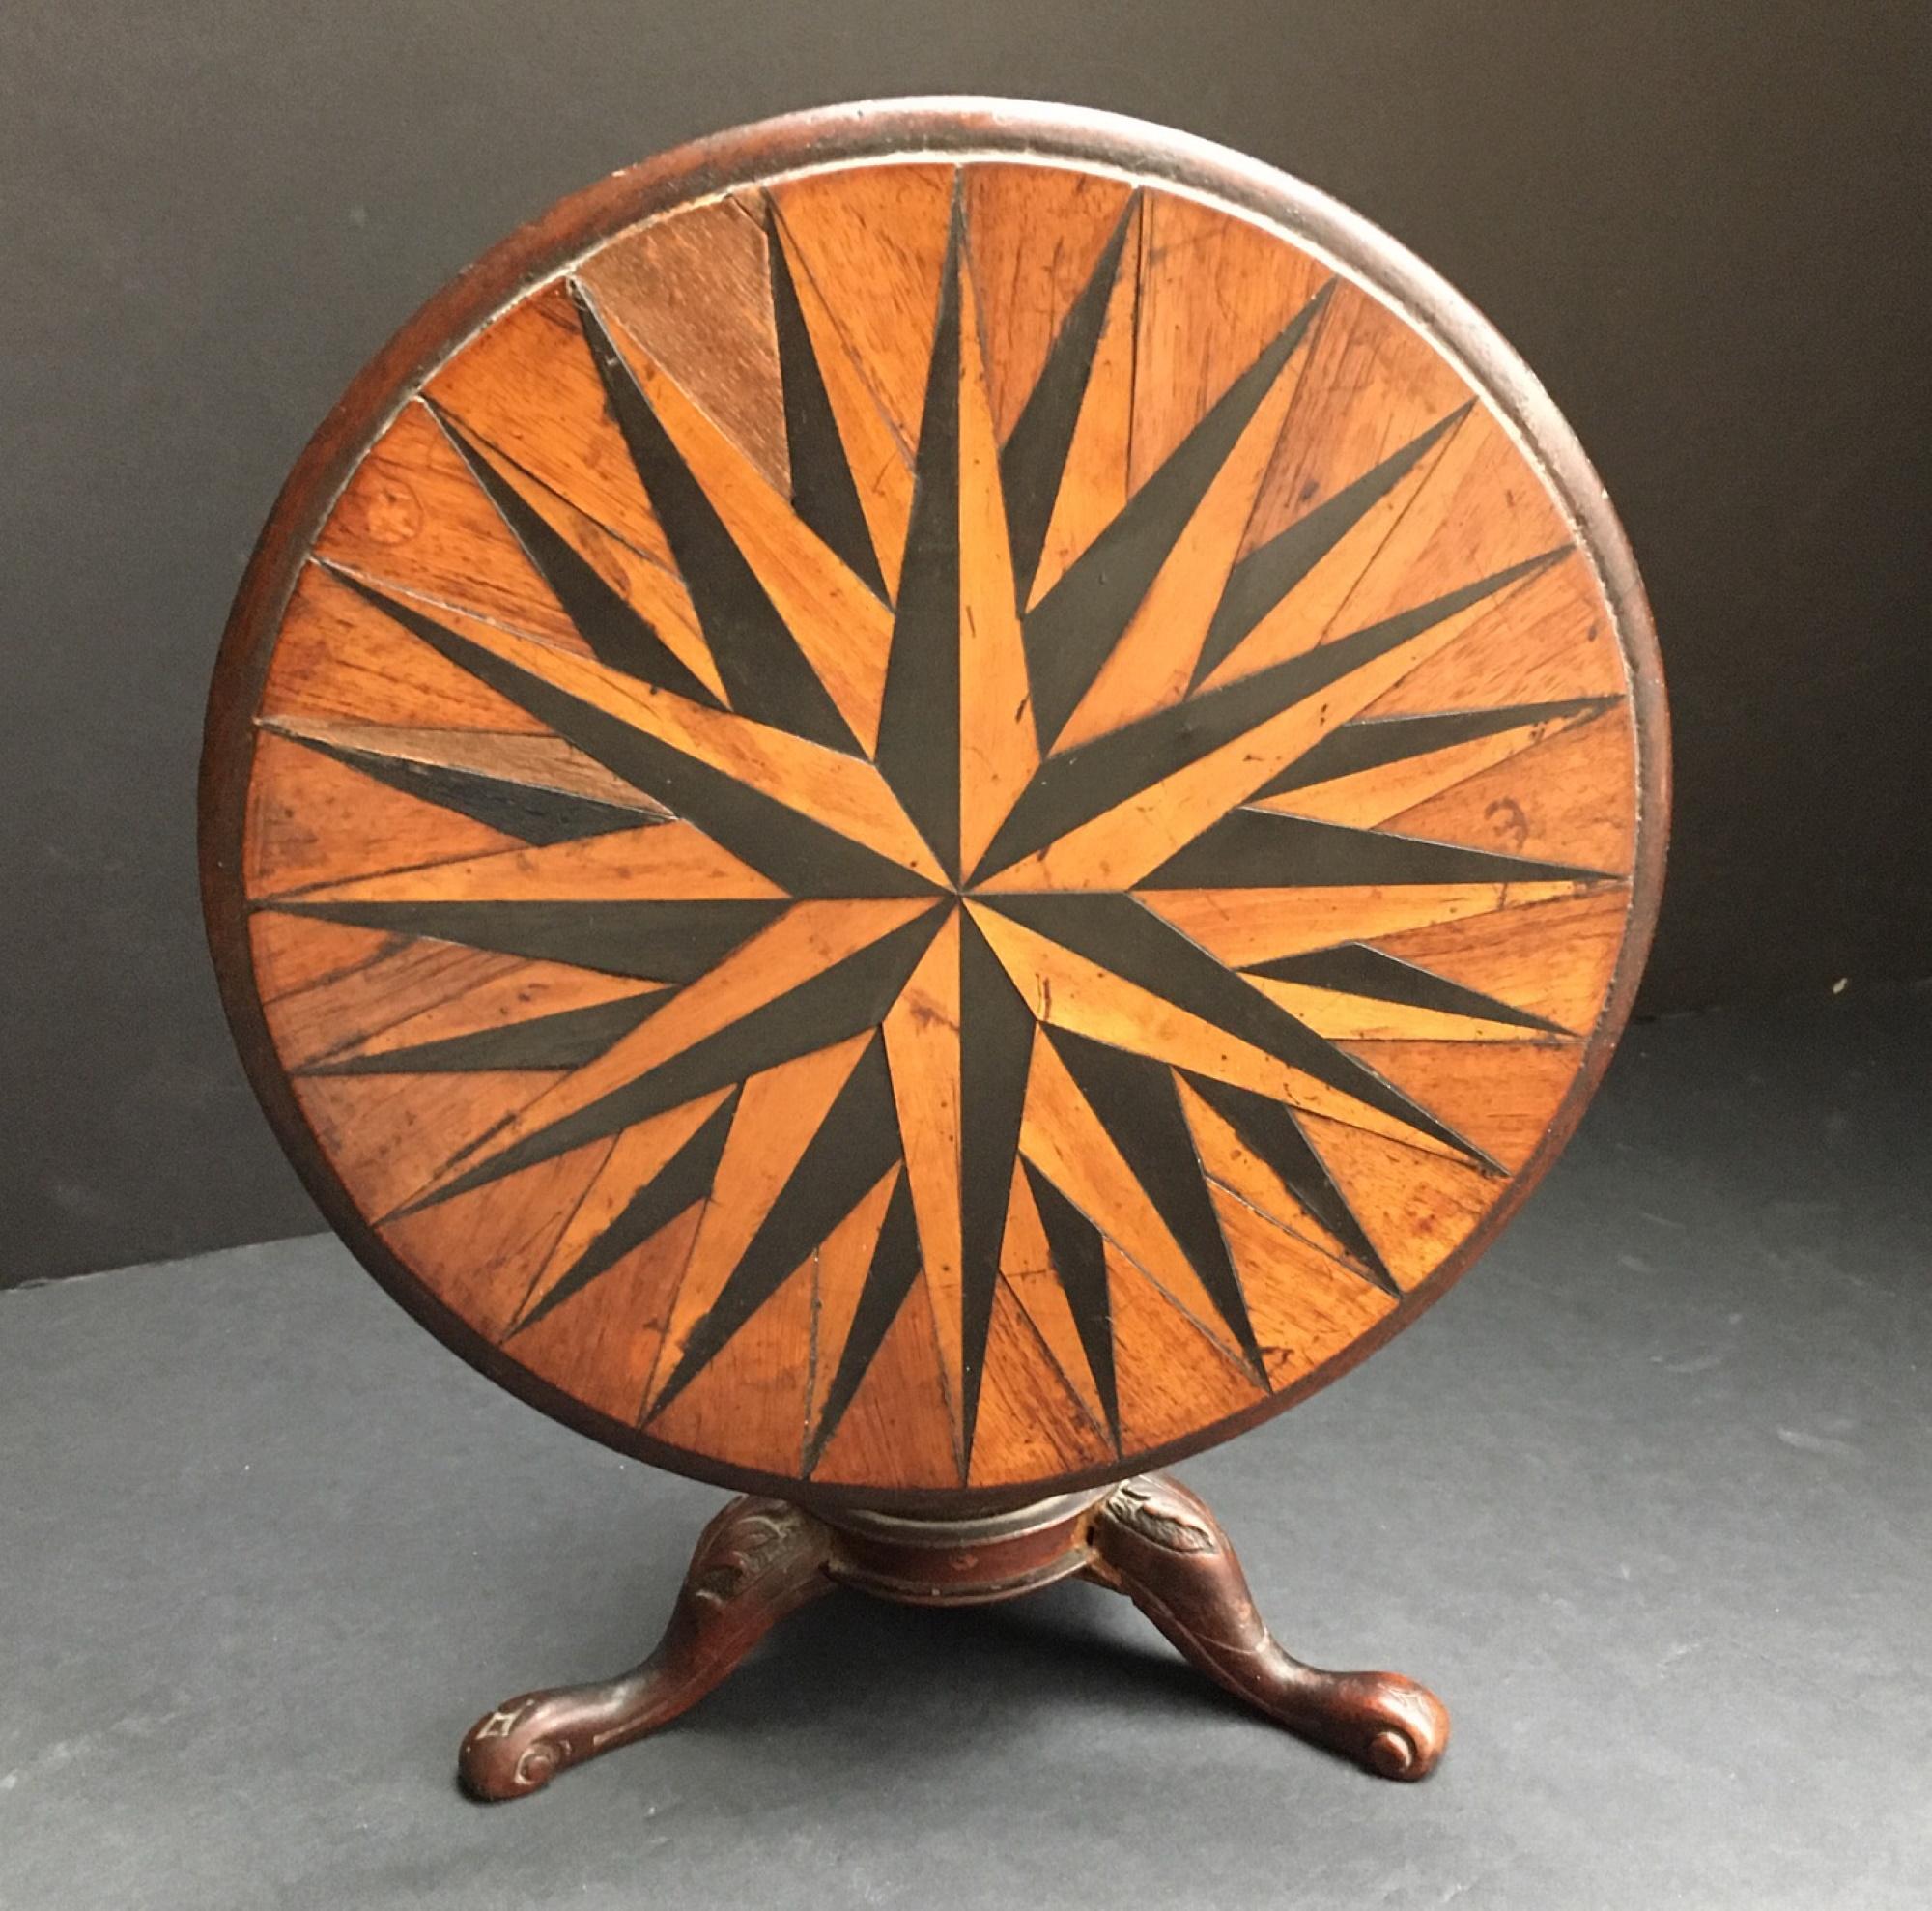 George III Antique Rare Miniature Marquetry Tilt-Top Table, Ralph Turnbull, 1788-1865